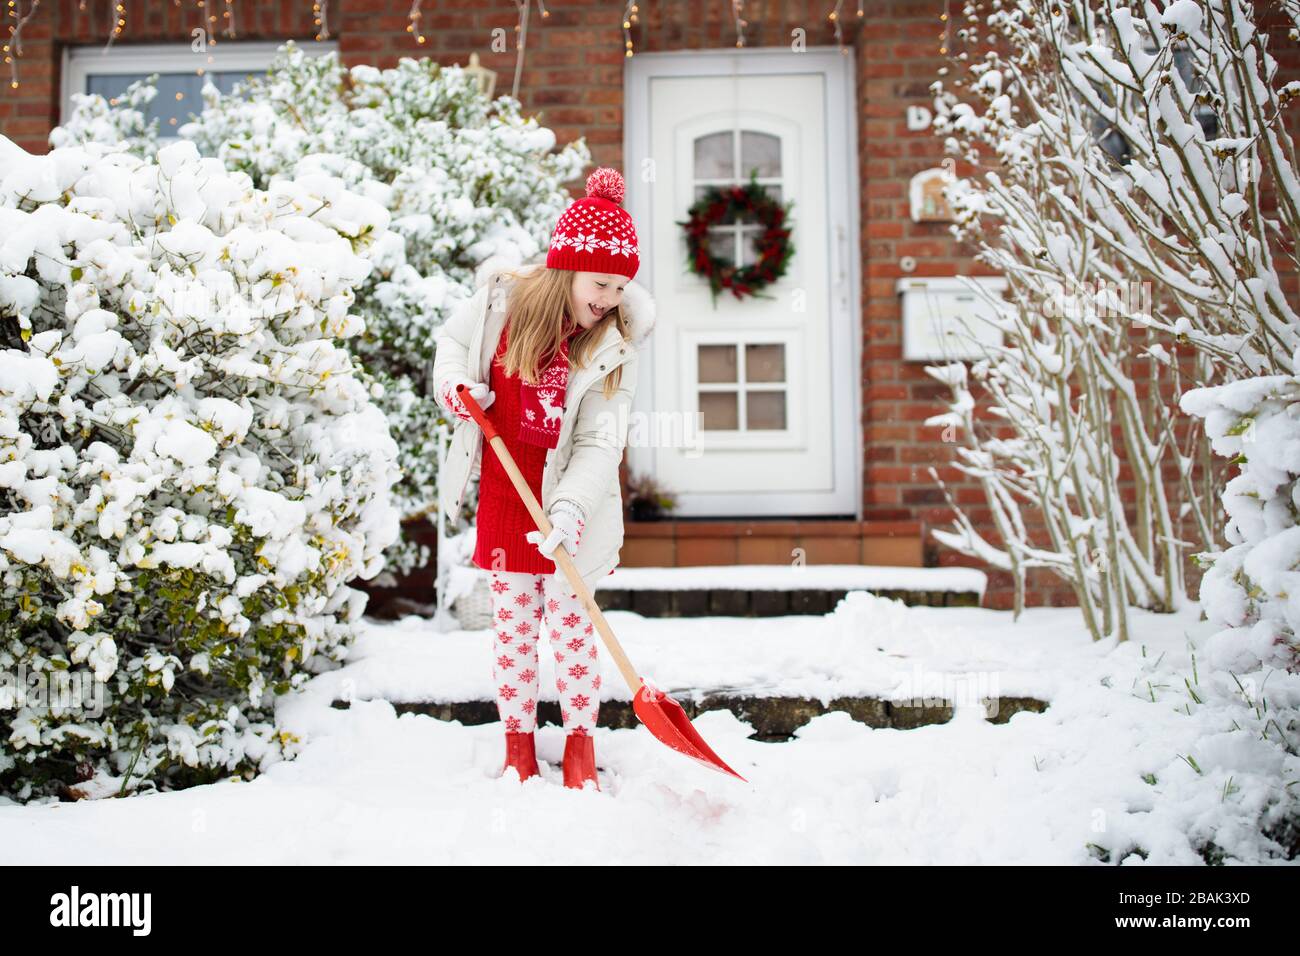 Child shoveling snow. Little girl with spade clearing driveway after winter snowstorm. Kids clear path to house door after Christmas blizzard. Snowfal Stock Photo